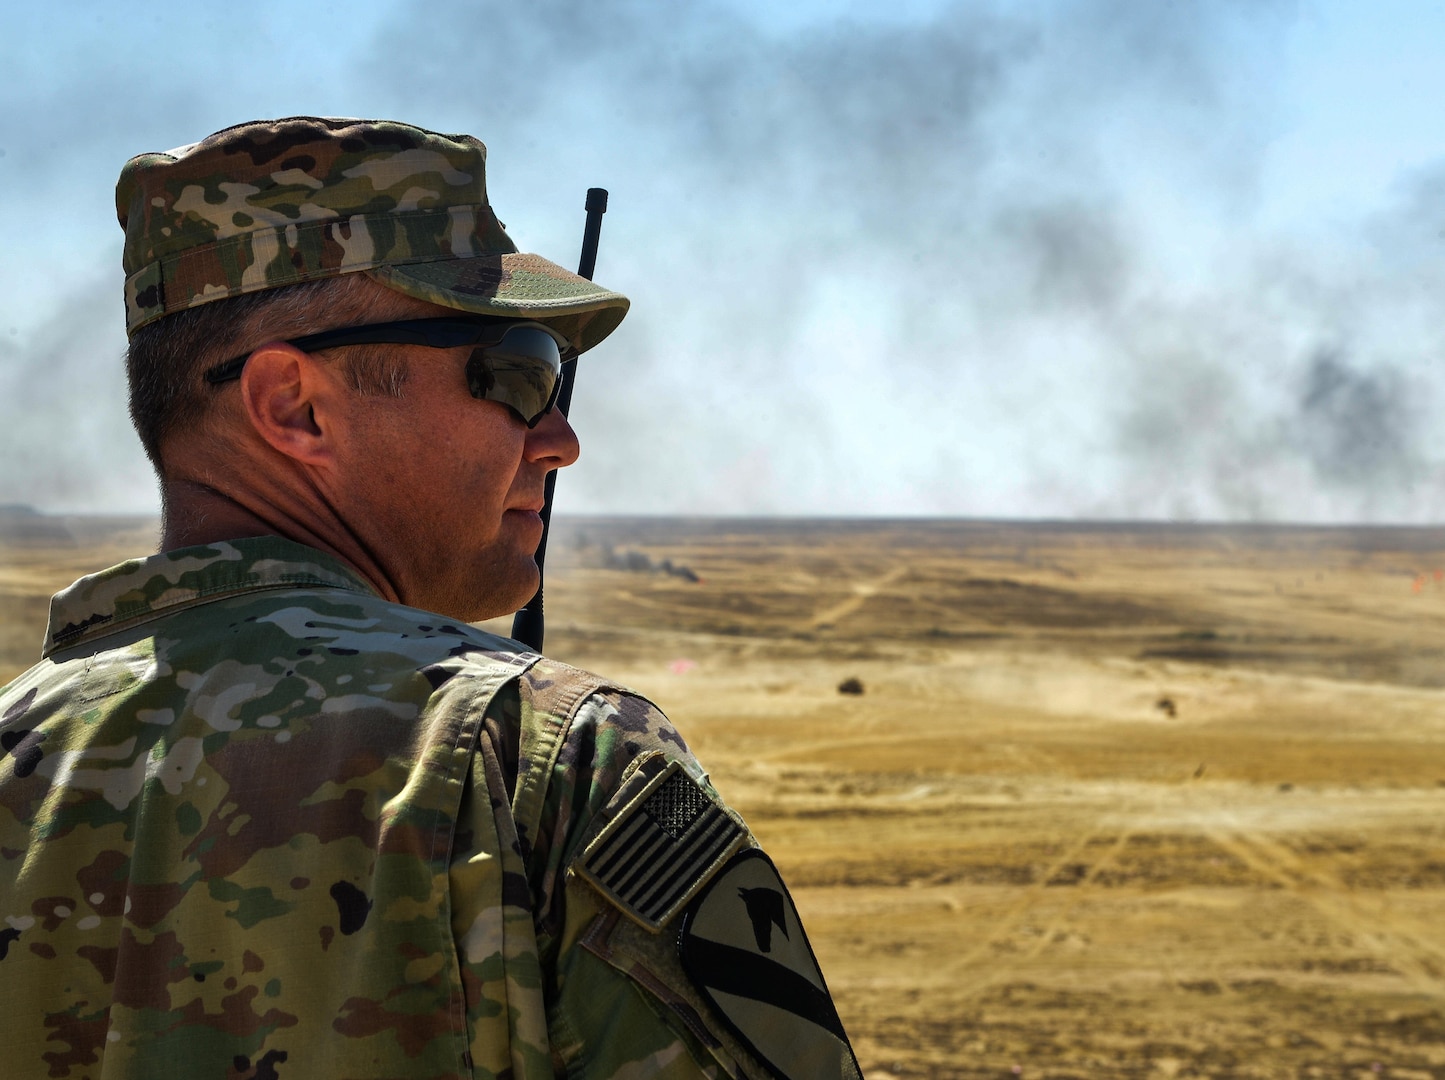 U.S. Army Lt. Col. William Wade, 2nd Battalion, 7th Cavalry Regiment, 3rd Armored Combat Team, 1st Cavalry Division battalion, watches the conclusion of a combined arms live fire exercise during Bright Star 2017, Sept. 20, 2017, at Mohamed Naguib Military Base, Egypt. Bright Star was last held in 2009 with more than 15 countries and 15,000 participants. (U.S. Air Force photo by Staff Sgt. Michael Battles)